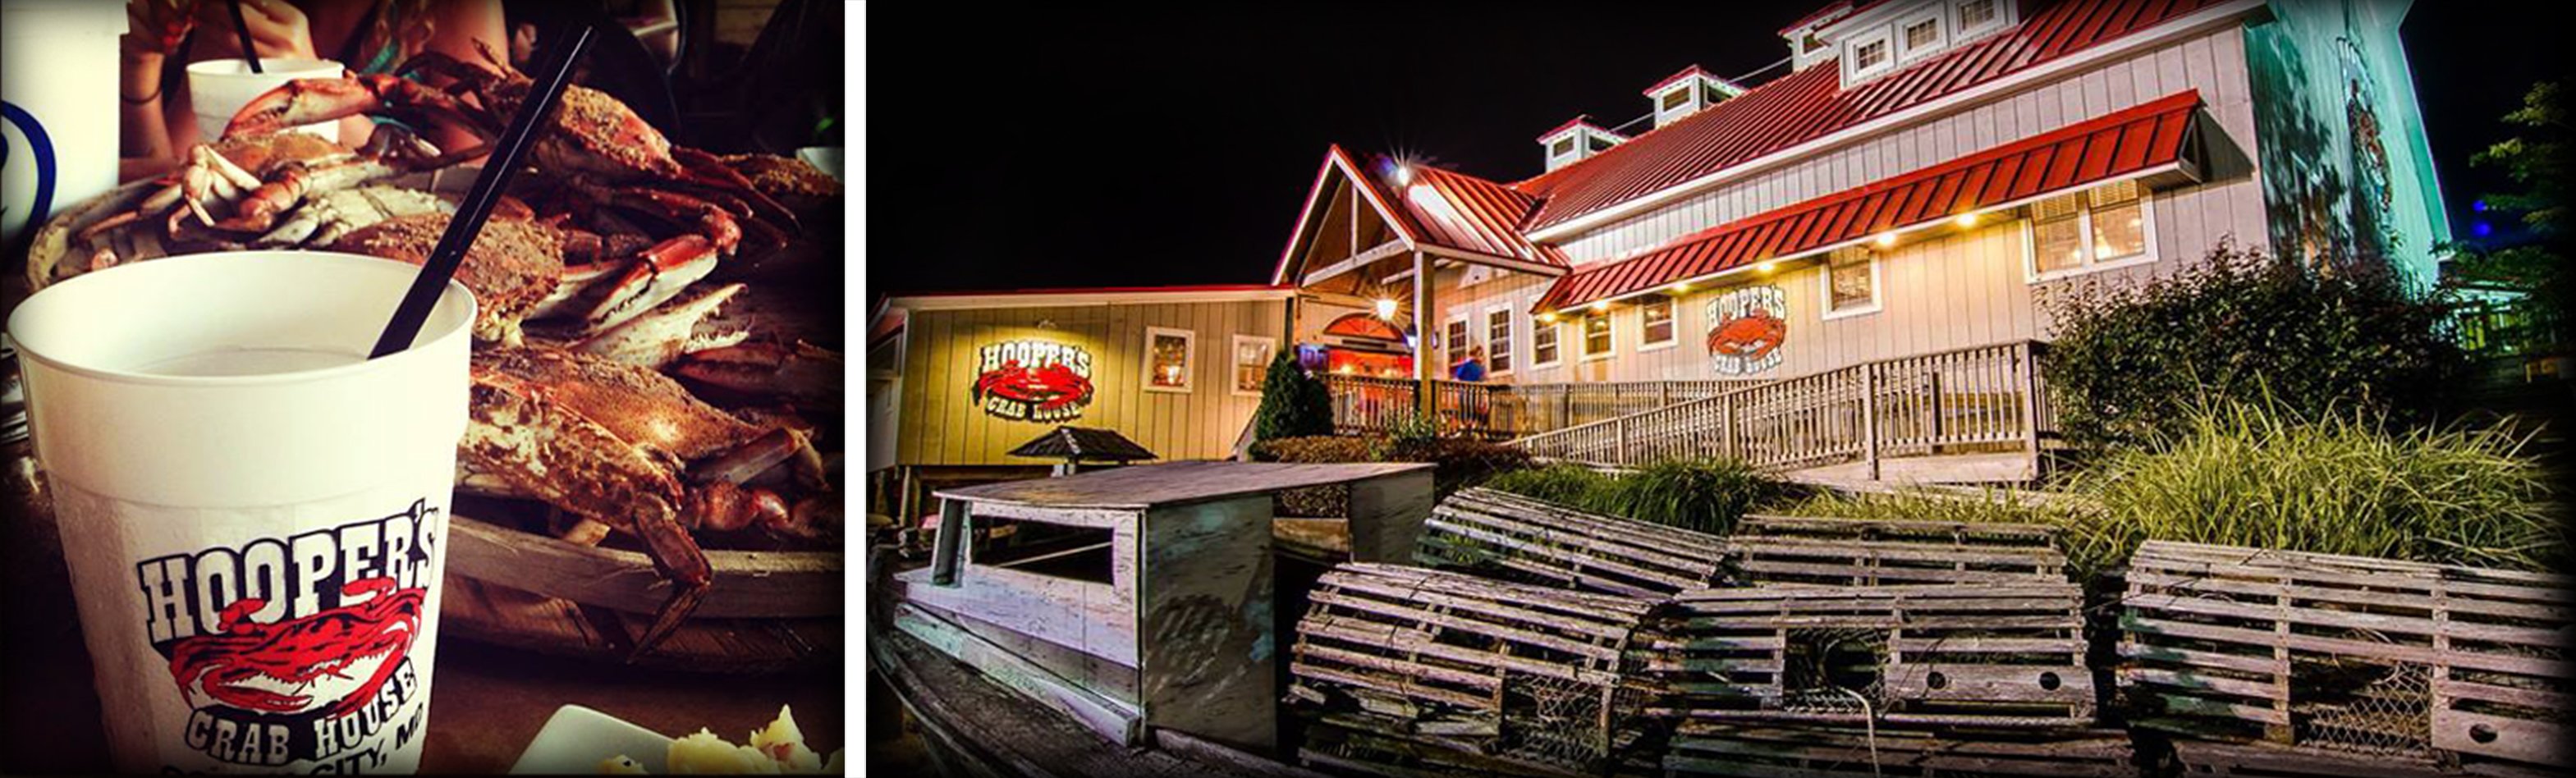 hooper's crab house at giant